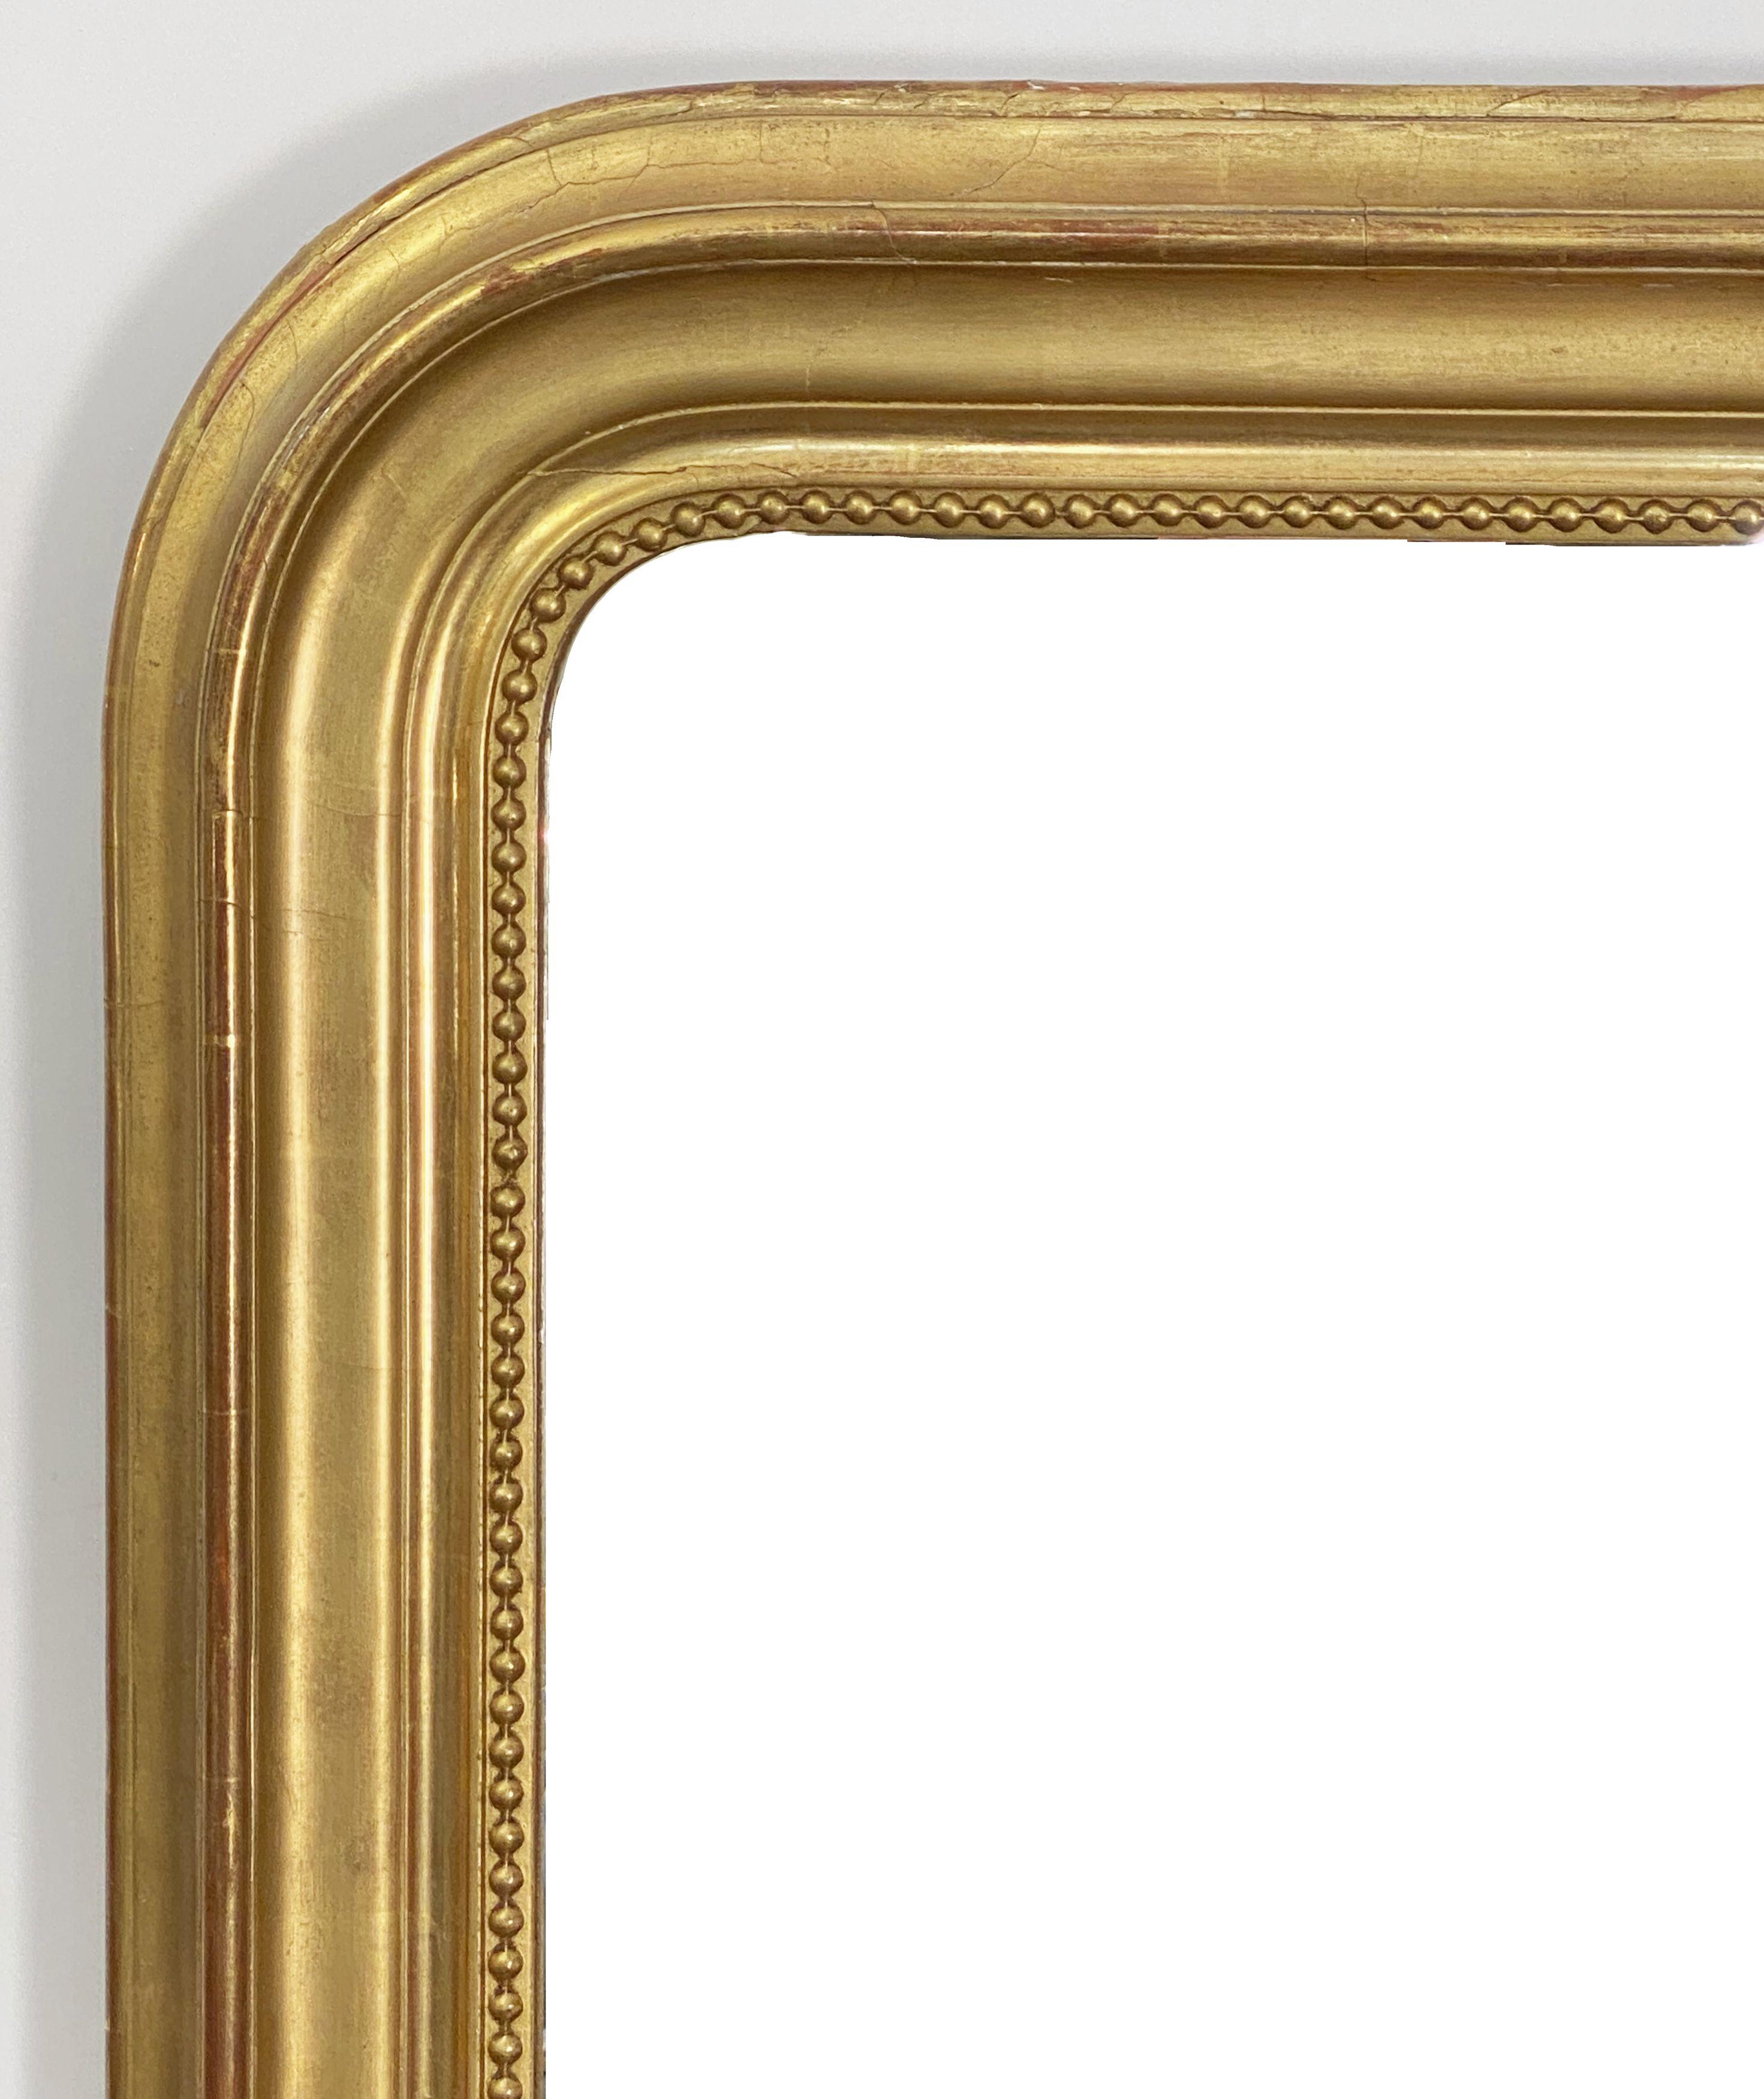 19th Century Large Arch Top Gilt Louis Philippe Mirror from France (H 52 x W 43 1/2)